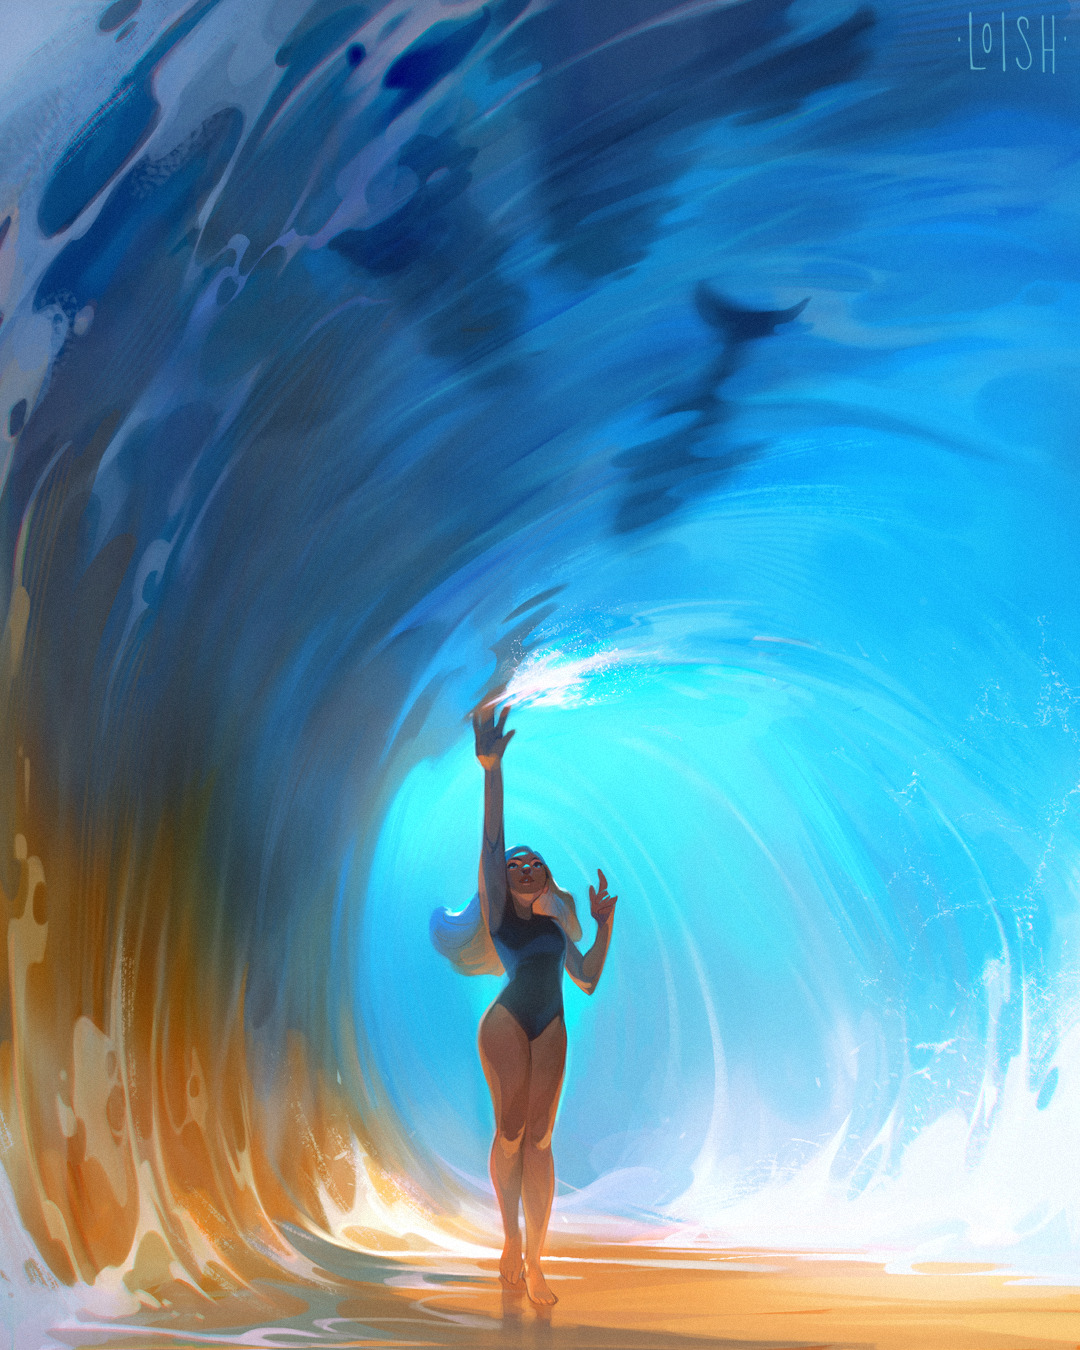 Anime 1080x1350 Loish one-piece swimsuit portrait display long hair looking up one arm up depth of field standing barefoot backlighting tunnel black swimsuit swimwear legs together fish shark waves